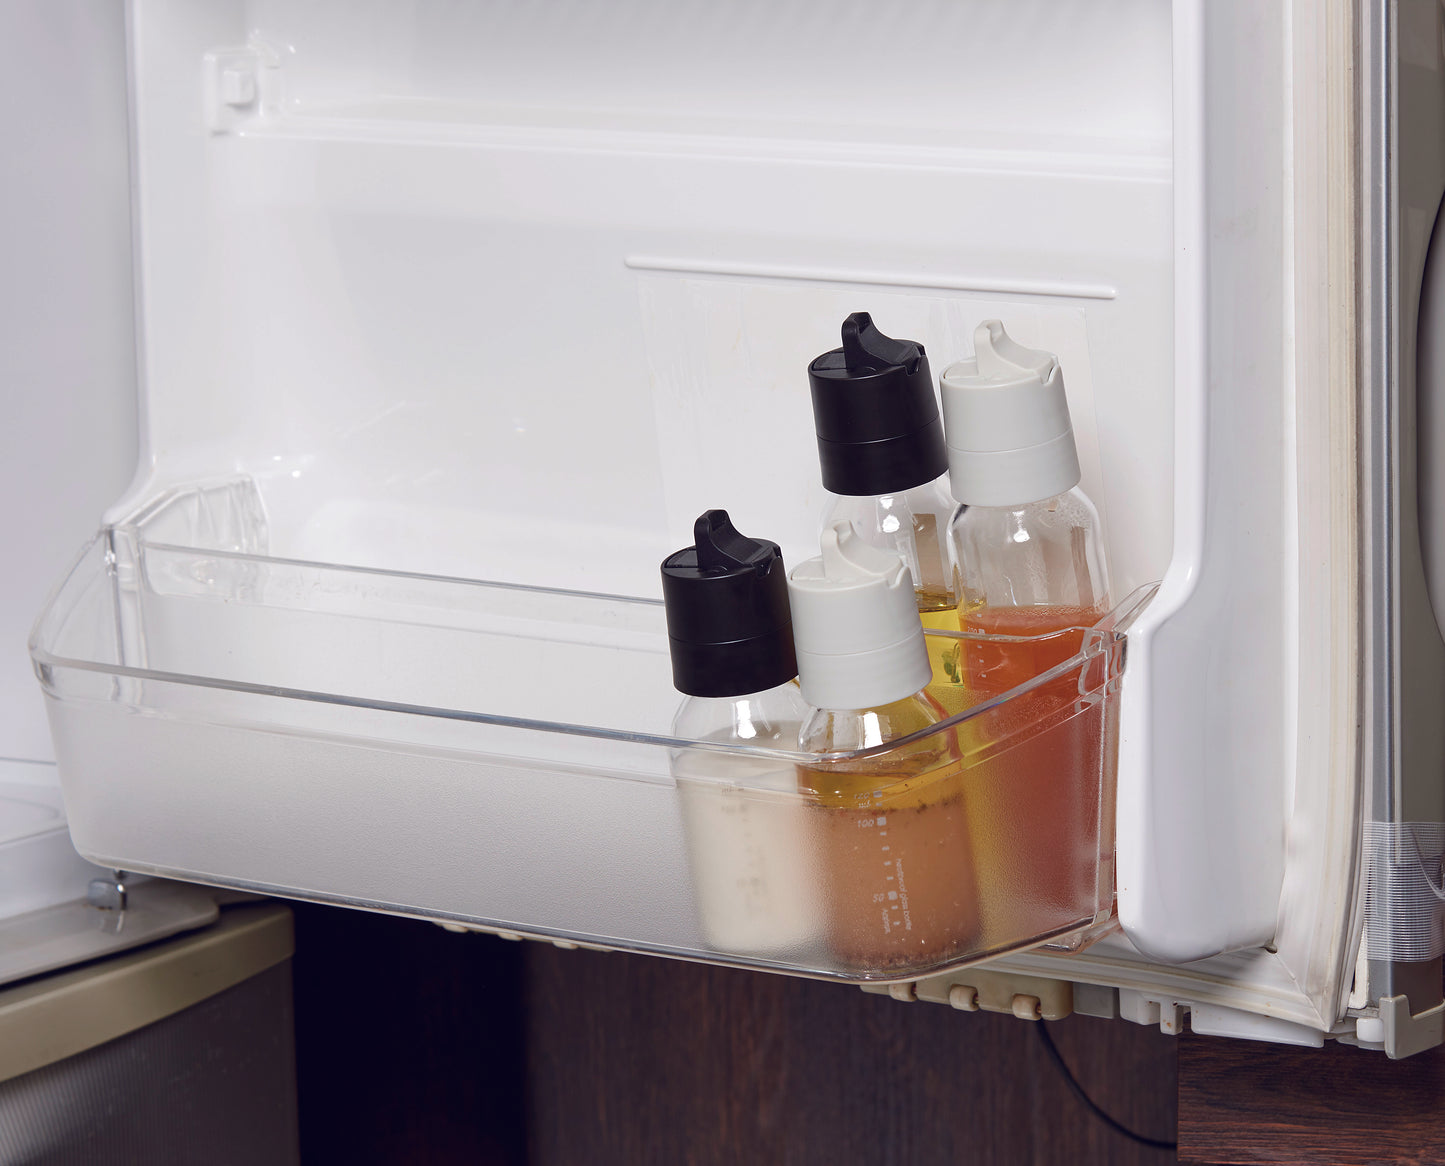 One Touch Dressing Bottle